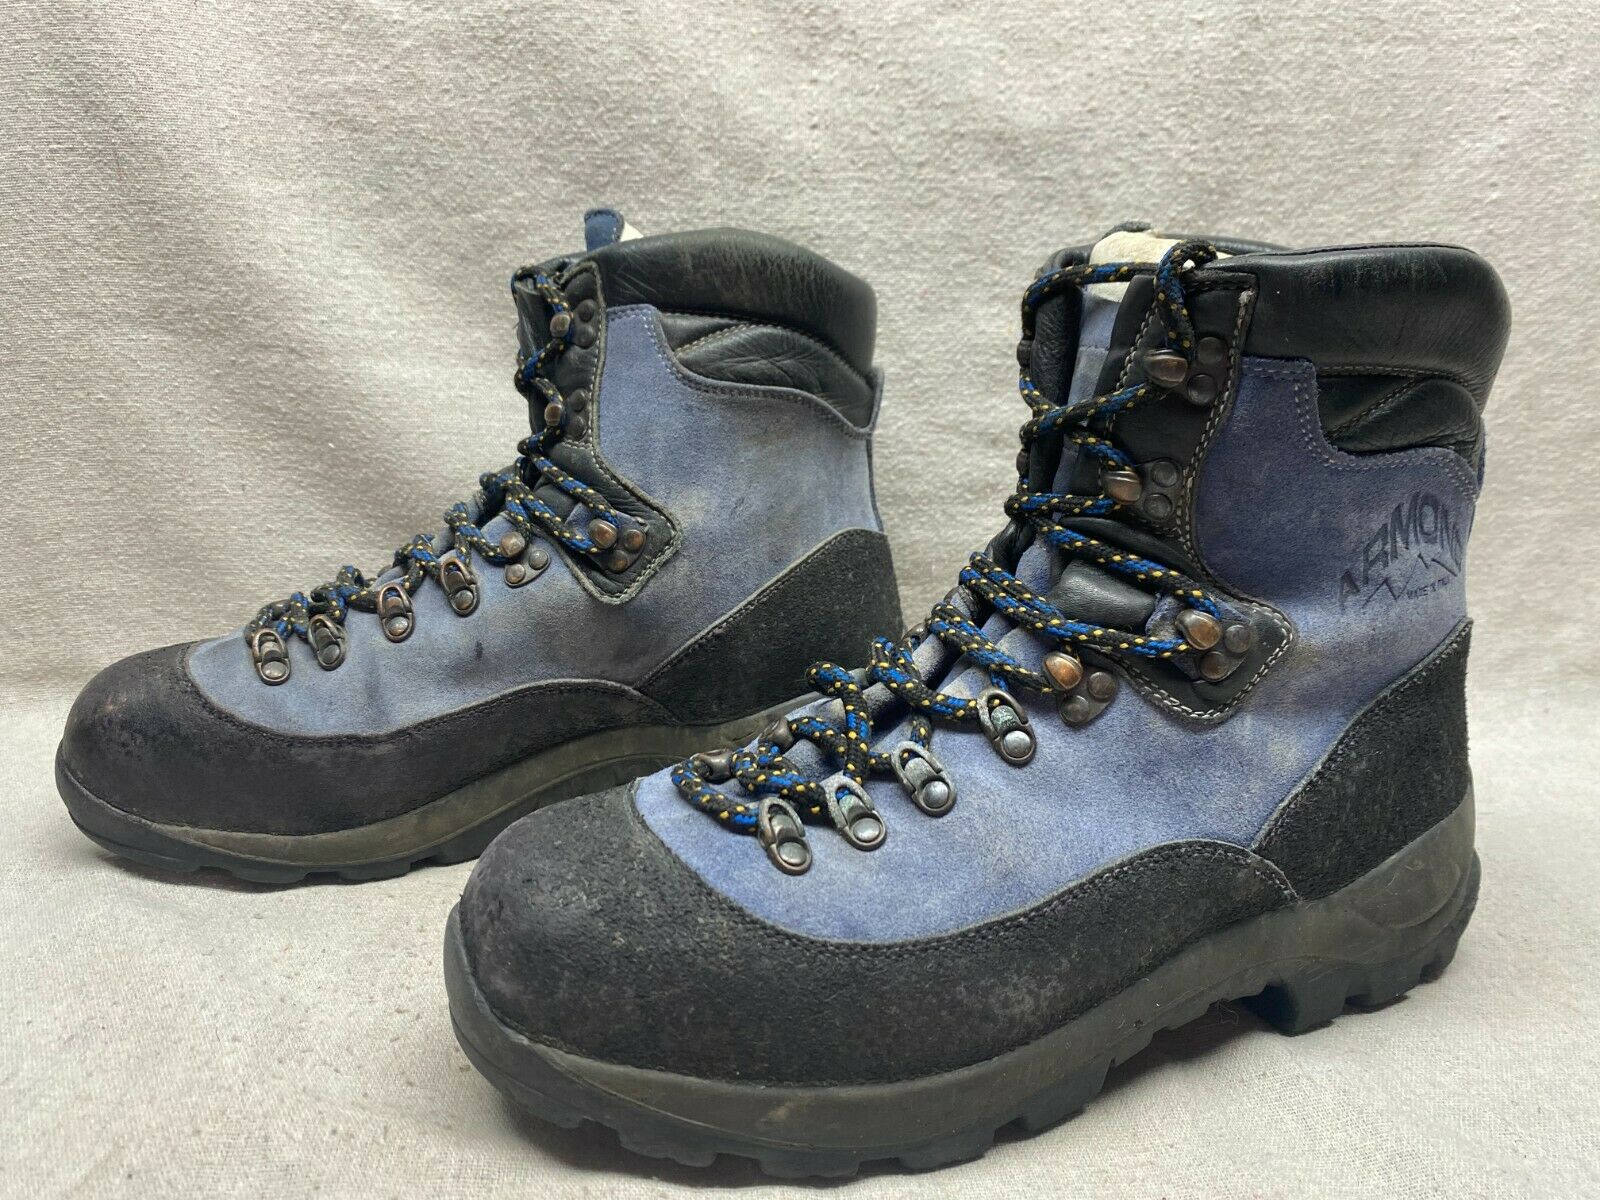 Armond Made in Italy Leather Hiking Boots With Vibram Soles Men's Size 44 / 10.5